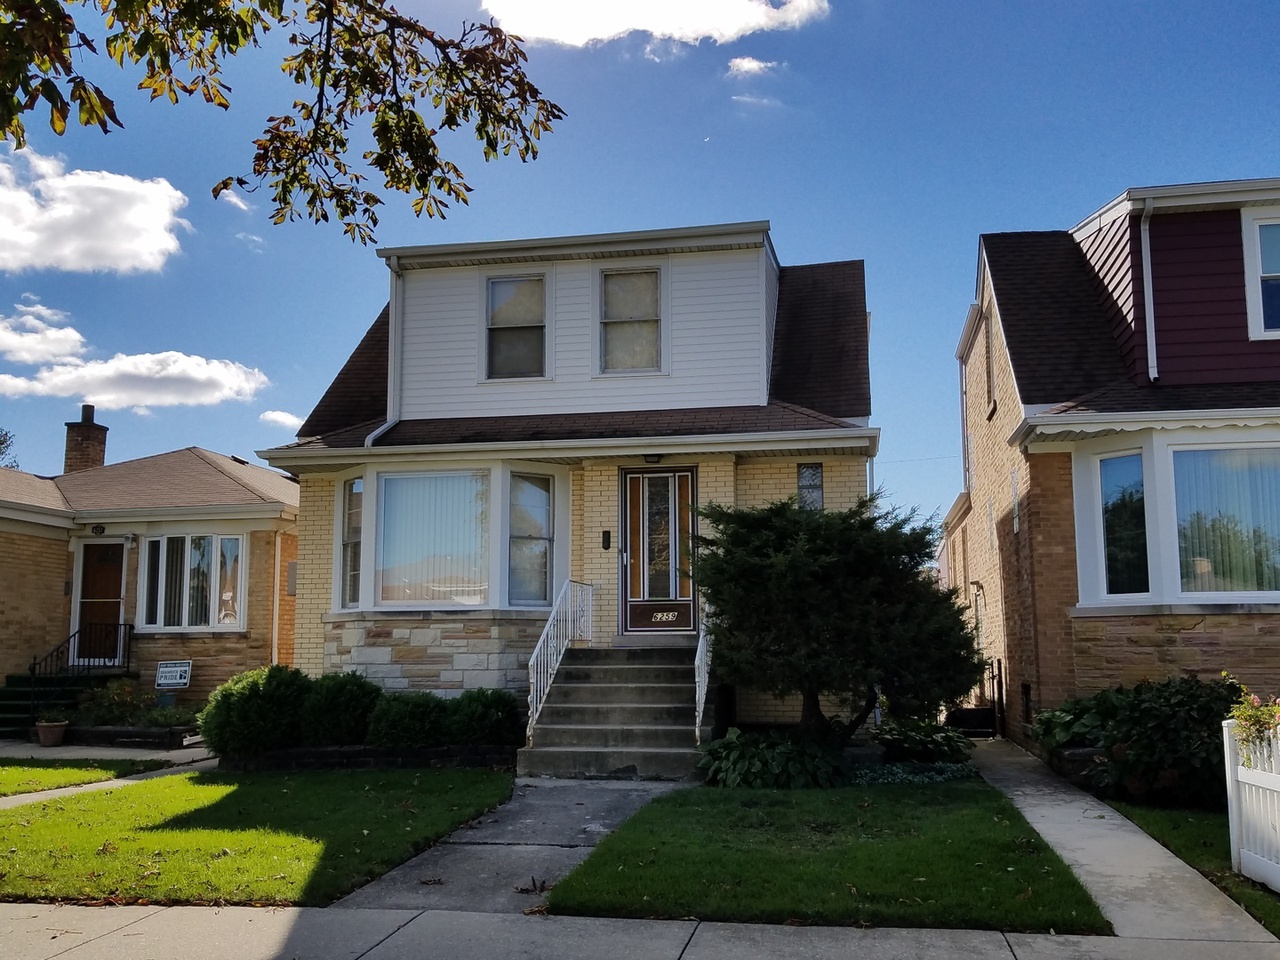 6259 W Lawrence Ave, Chicago, IL 60630 | MLS# 10297252 | Redfin